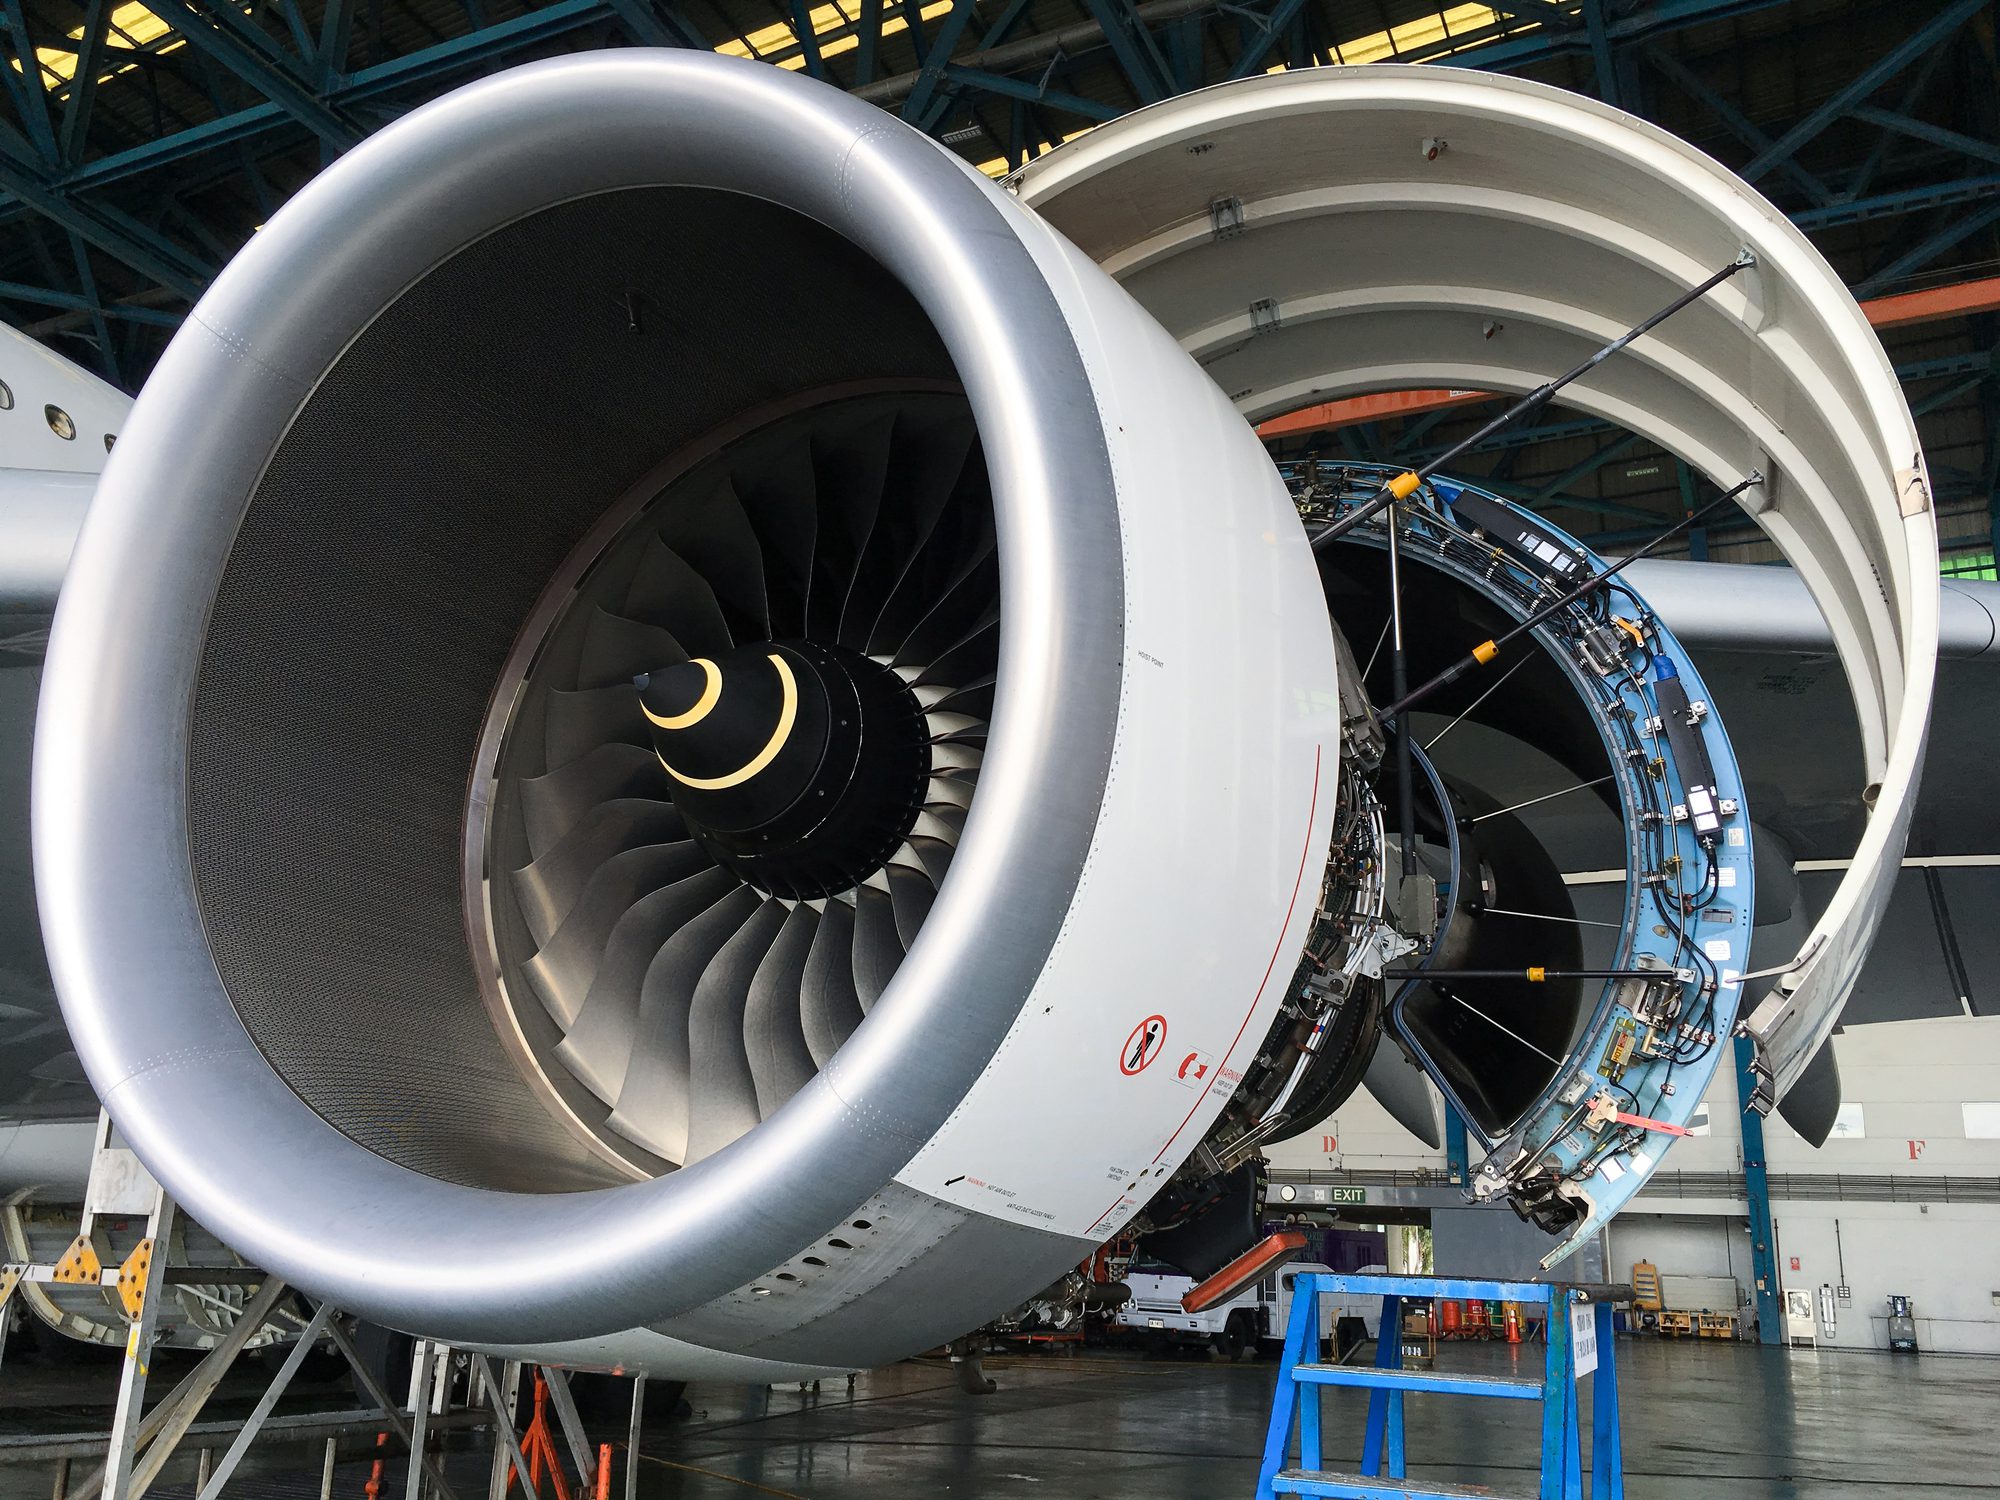 Engine aircraft opened for maintenance period check,aviation service and industrial